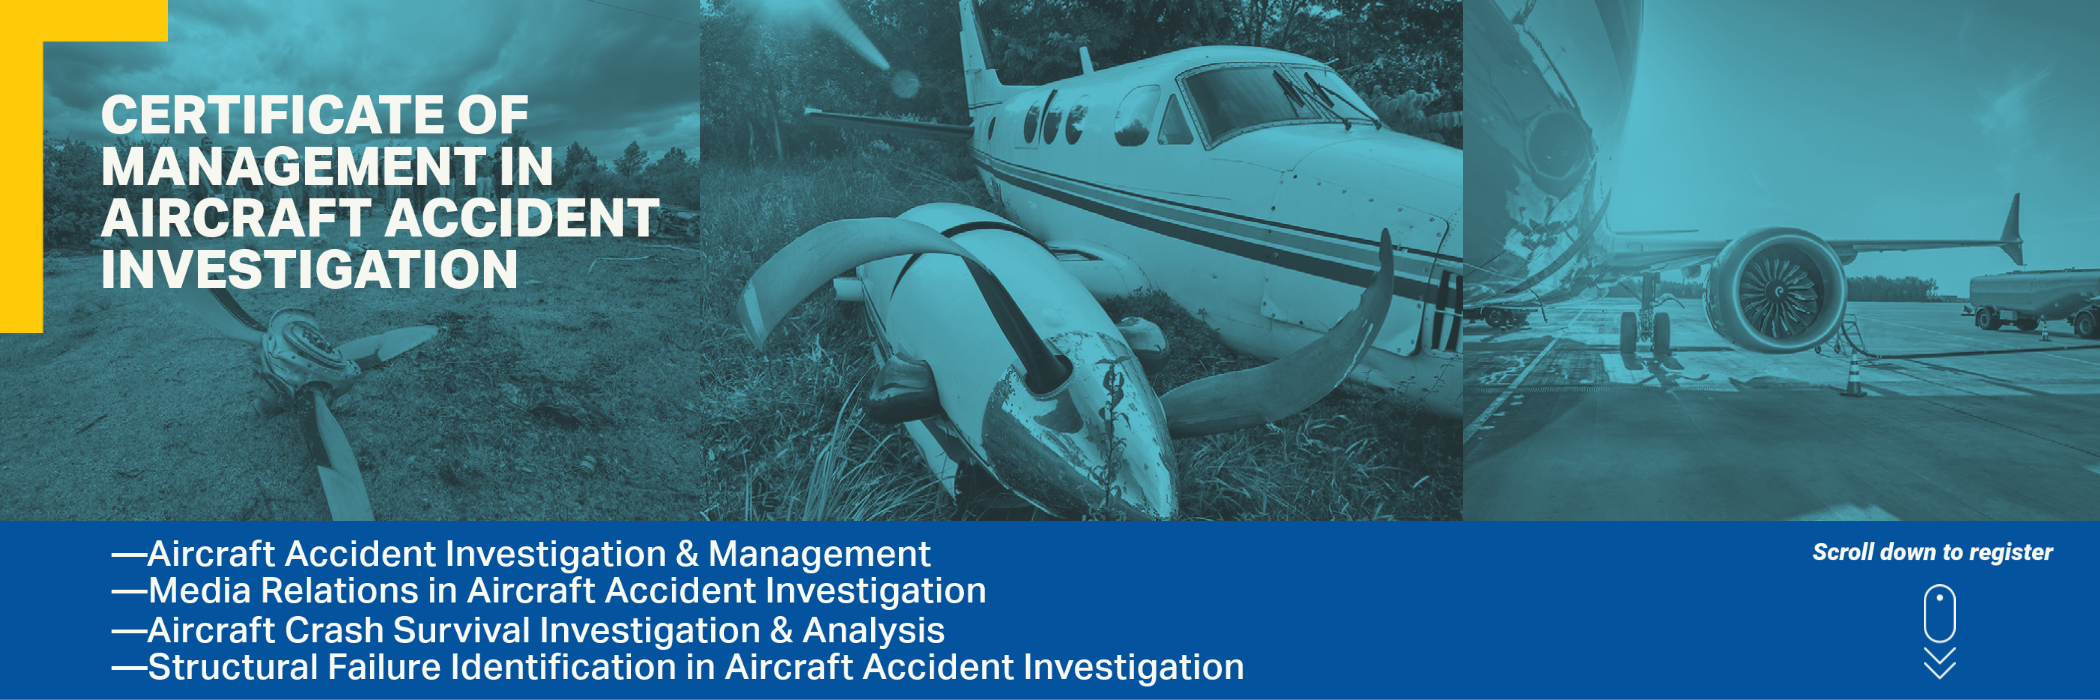 images of aircraft accidents